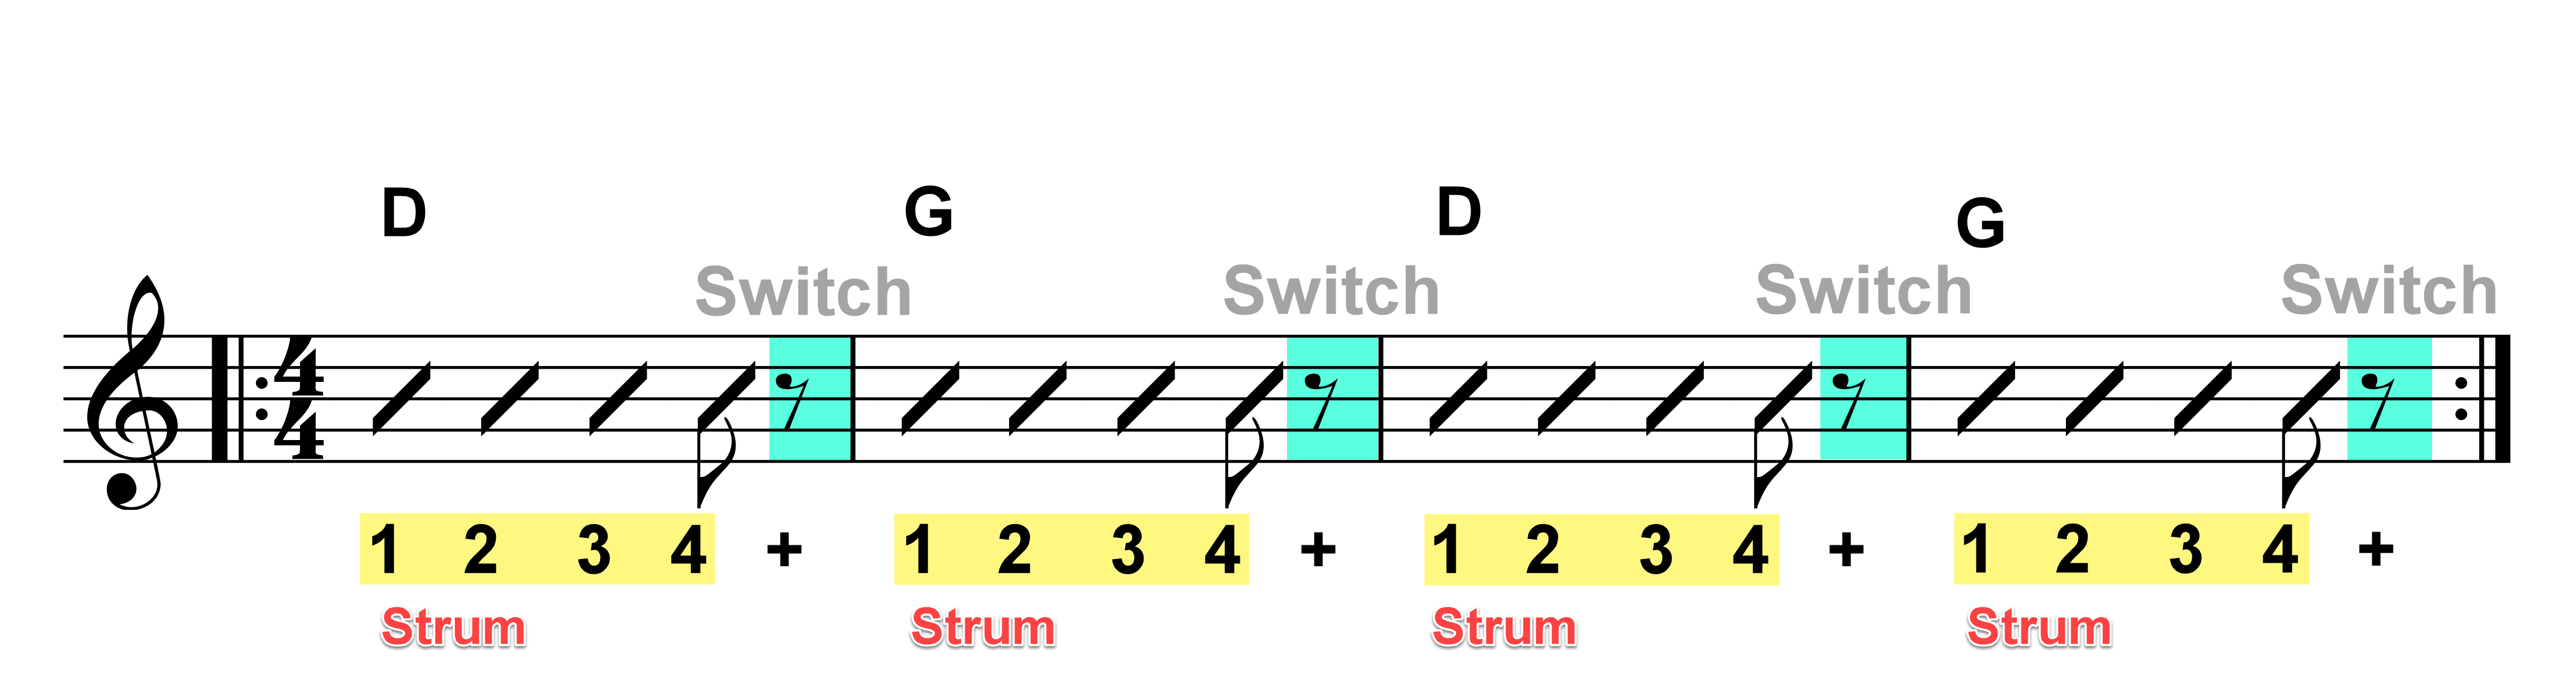 Chord switching game graphics-4-D to G